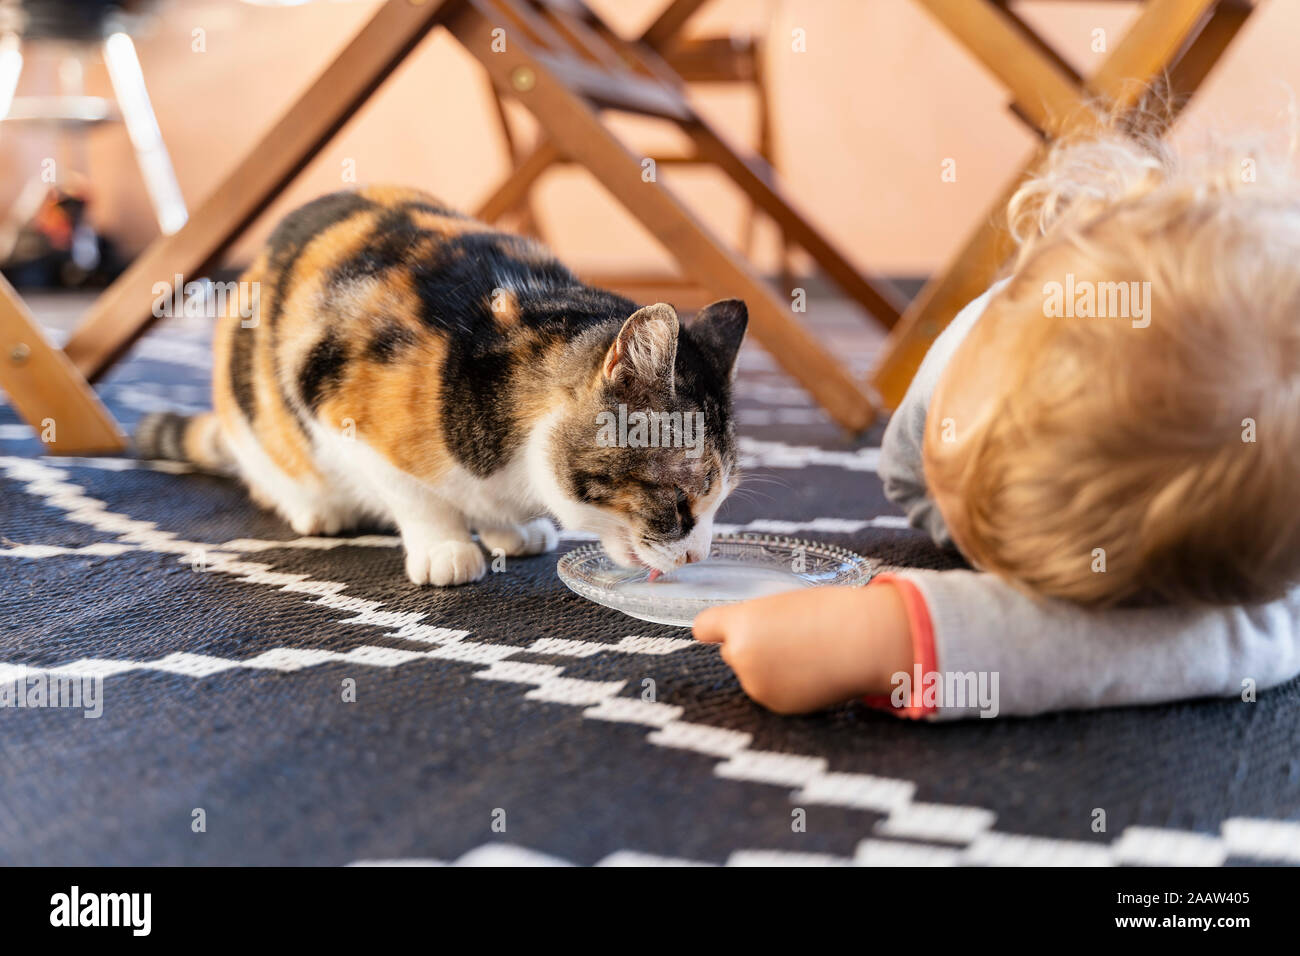 Cute toddler girl cat drinking from bowl Banque D'Images